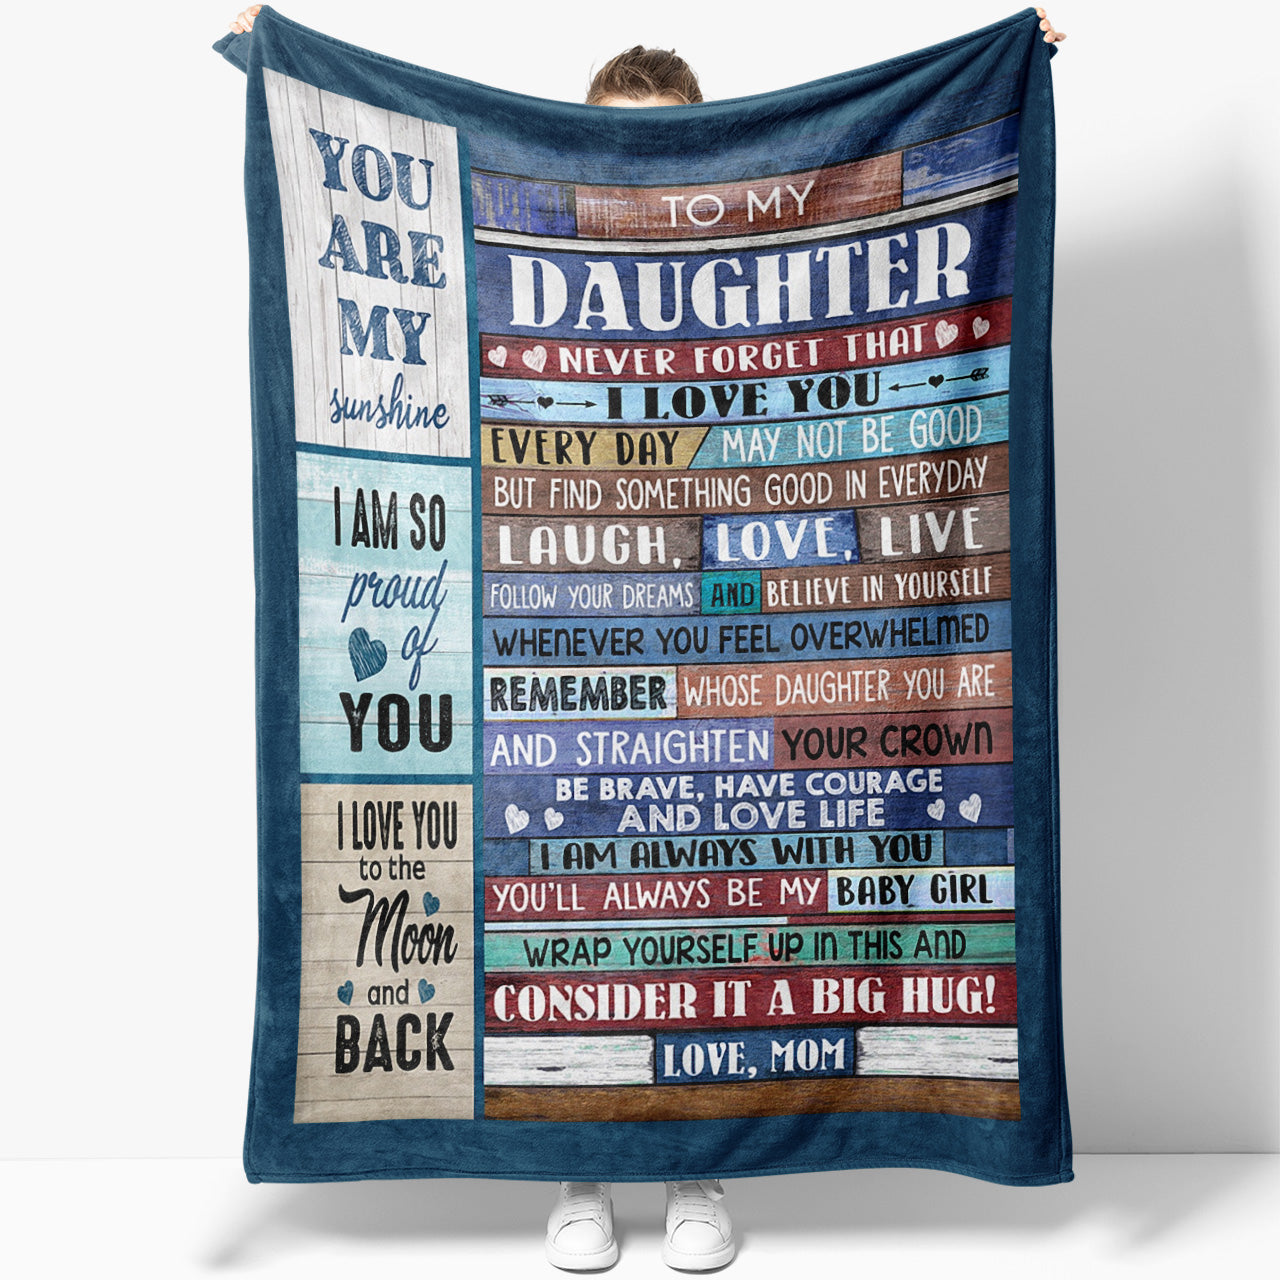 21 Meaningful Mother Daughter Gifts You Two Are Sure to Love